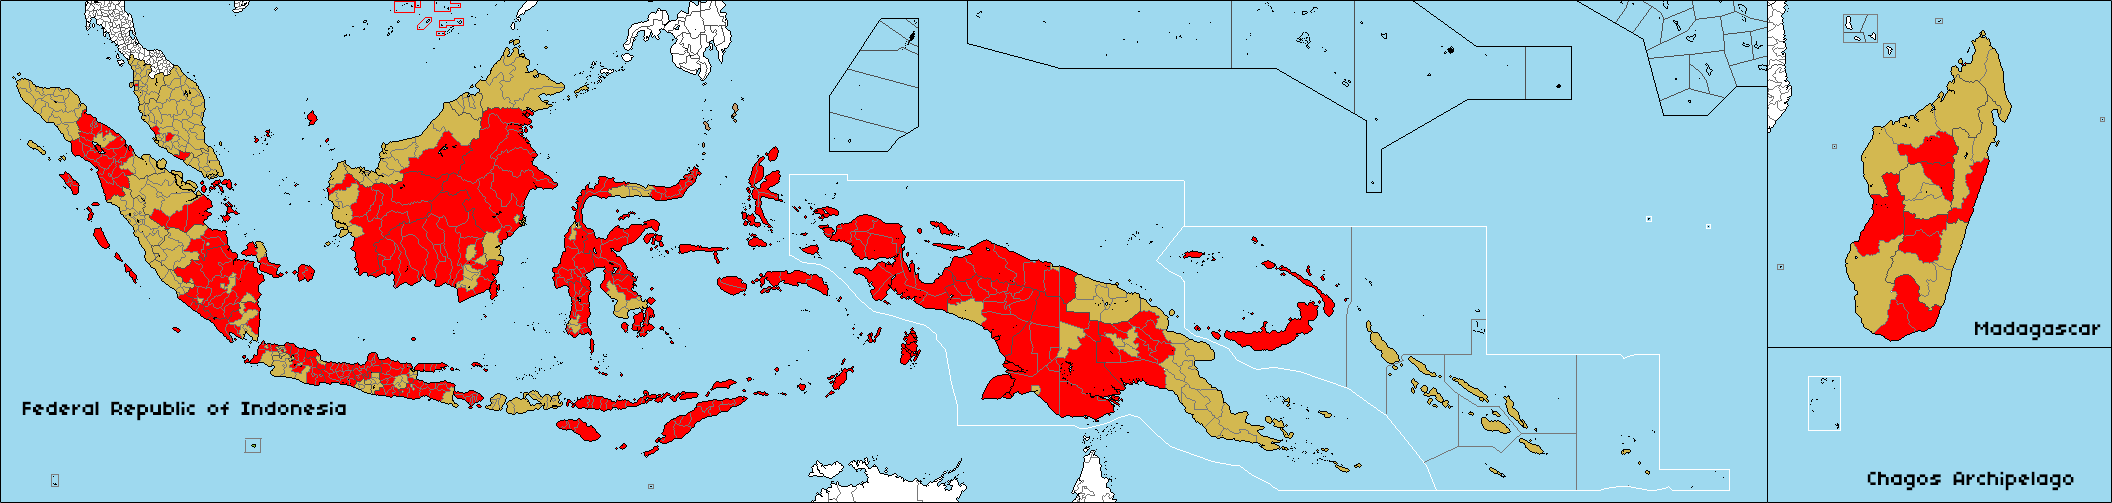 1988_Presidential_Indonesia.png